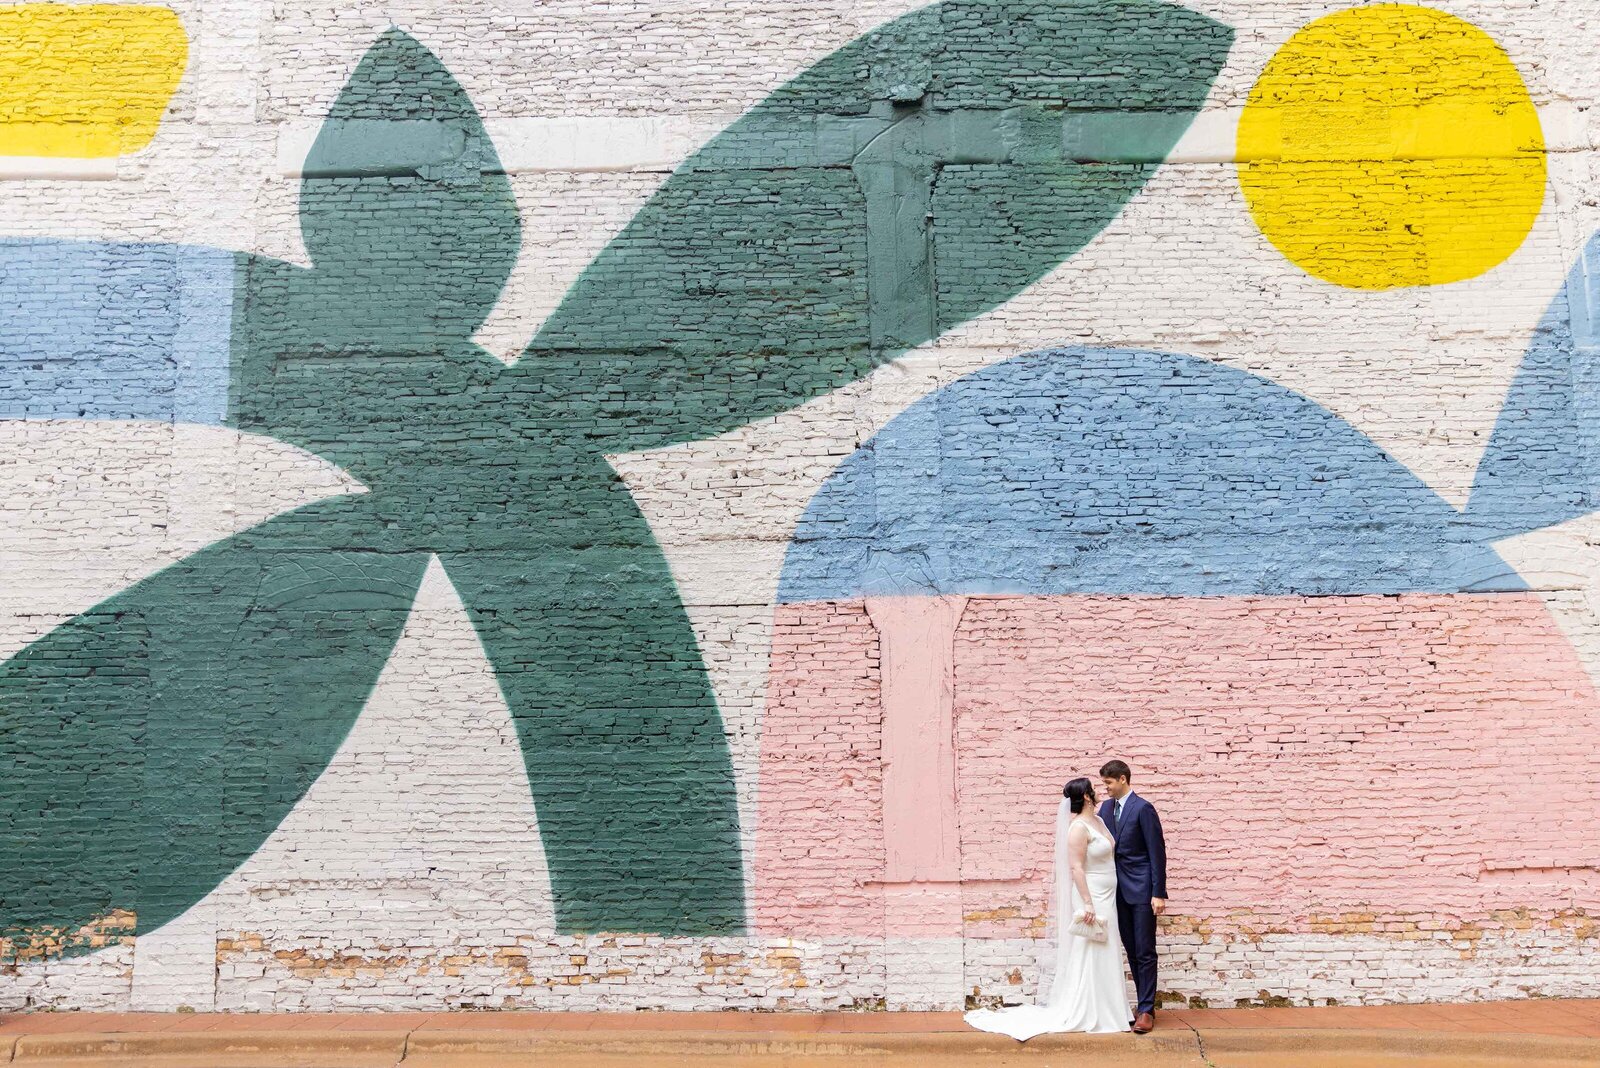 A wedding couple kissing in front of a large mural.